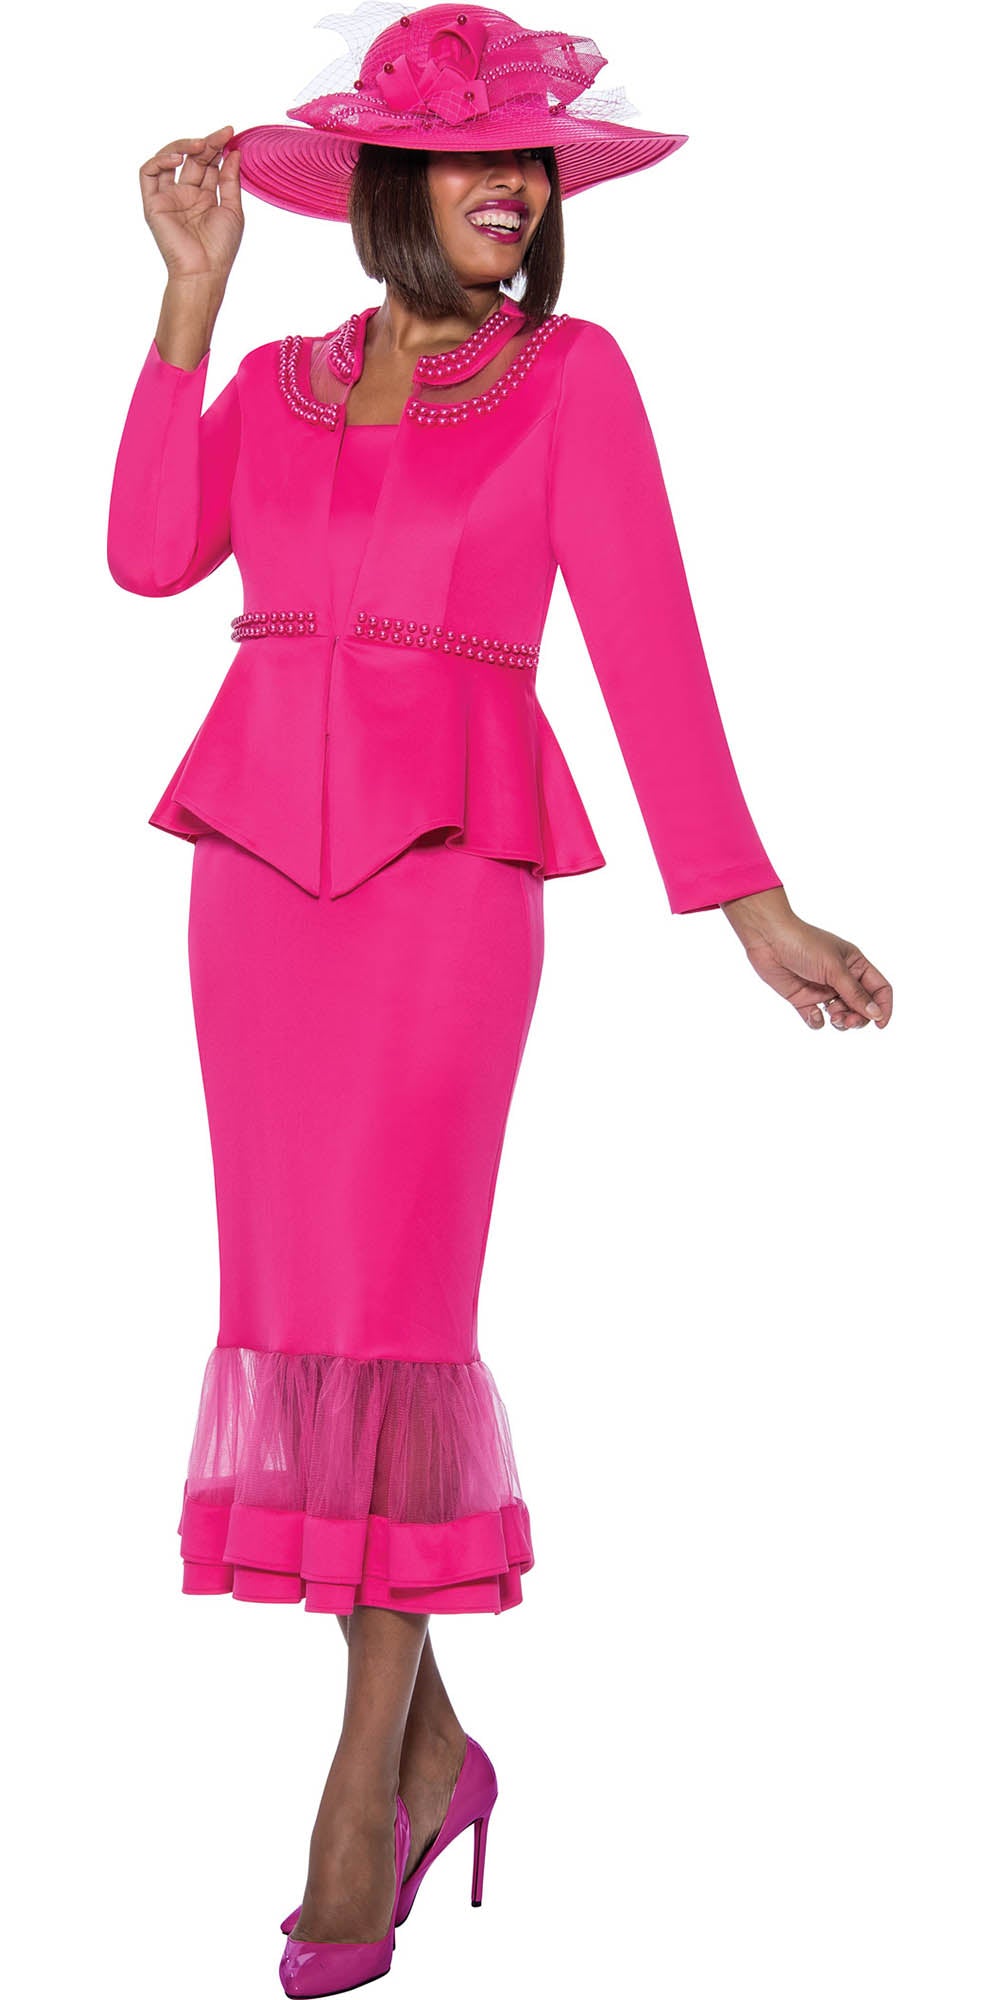 GMI G9512 - Hot Pink 3PC Peplum Skirt Suit with Pearl Details and Mesh Hemline